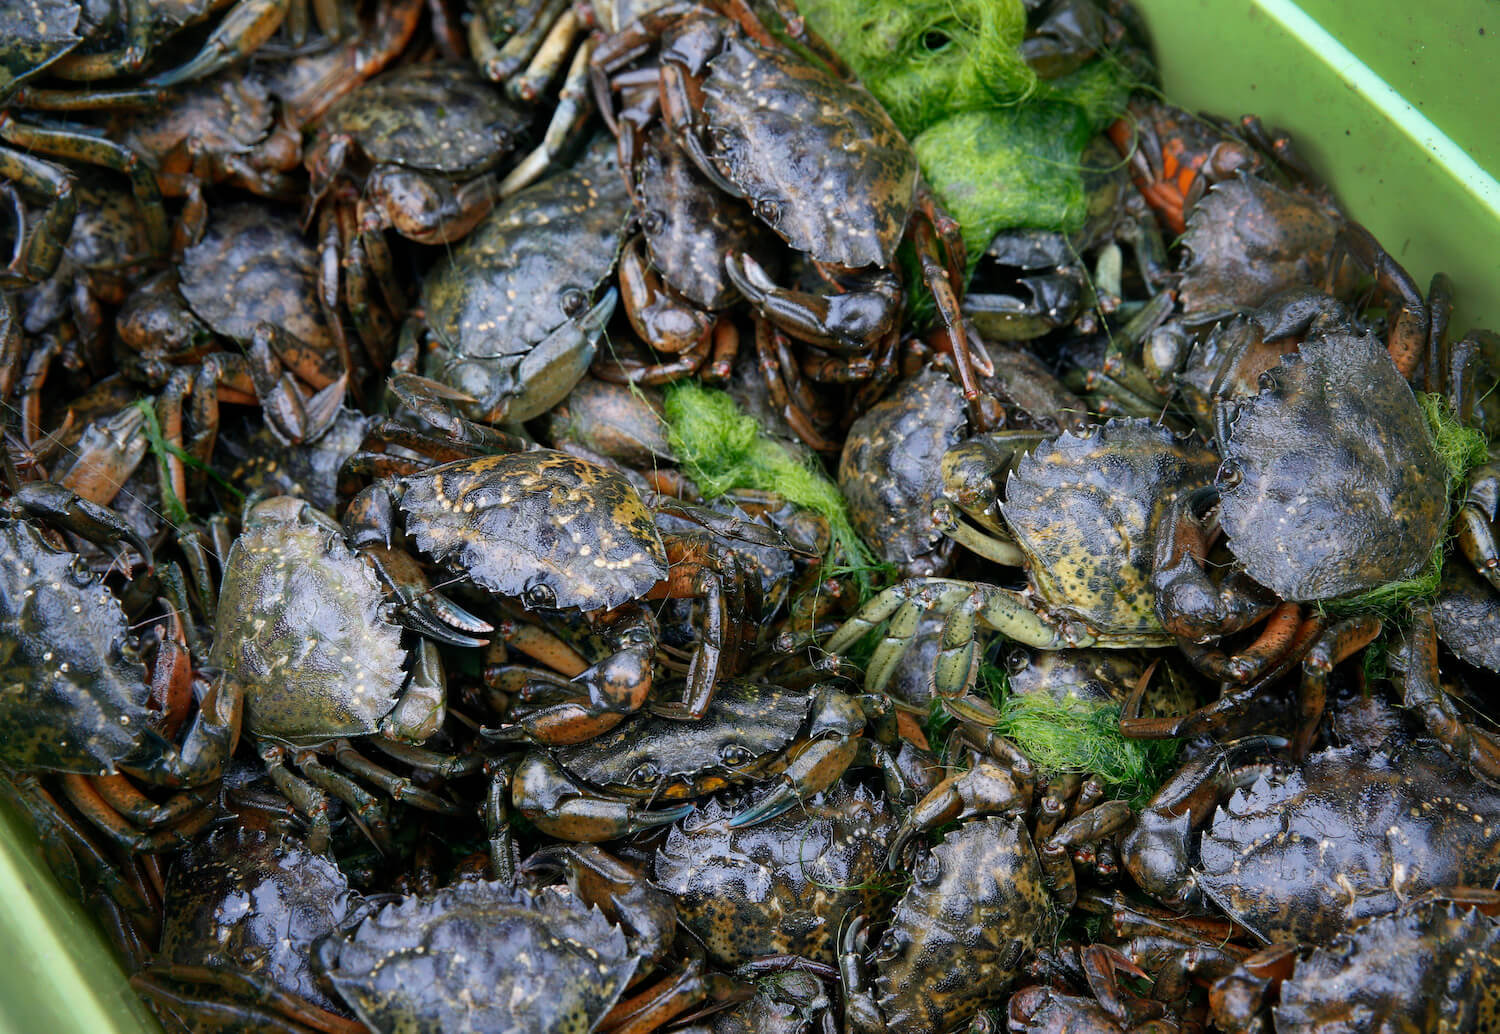 European green crabs trapped and removed from Seadrift Lagoon in Stinson Beach, Calif. by marine biologists are kept in a bin before they're measured and logged on Tuesday, Aug. 15, 2017. April 2021